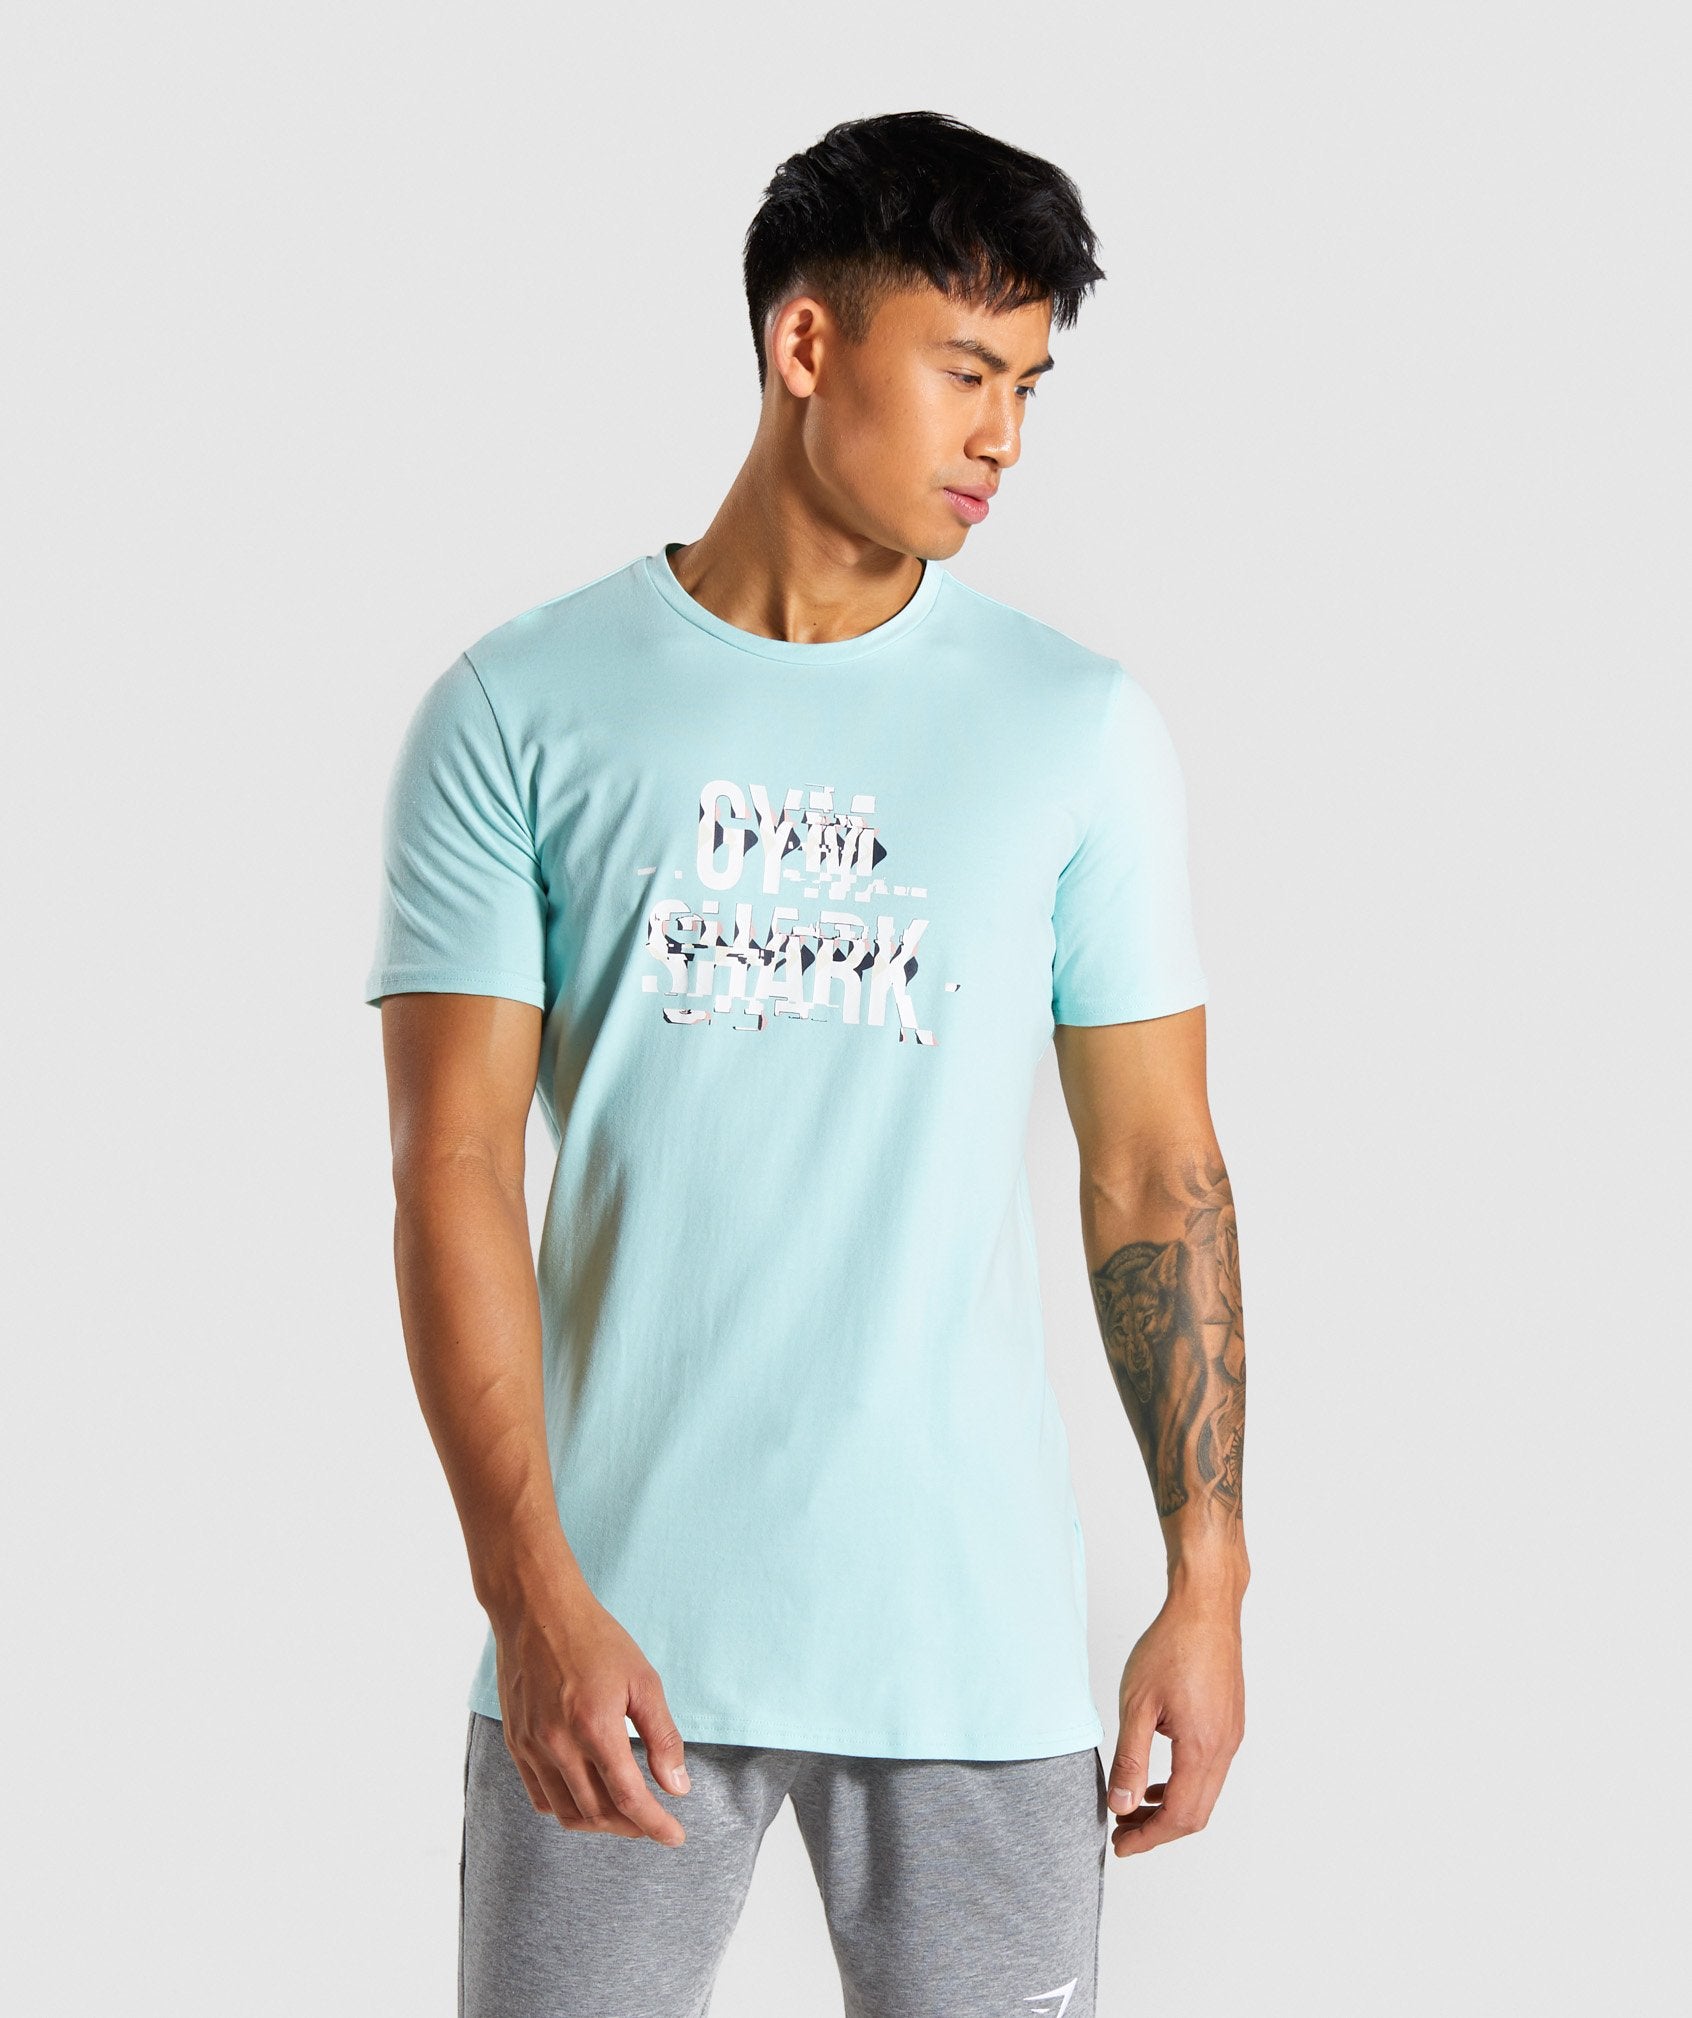 Glitch T-Shirt in Turquoise